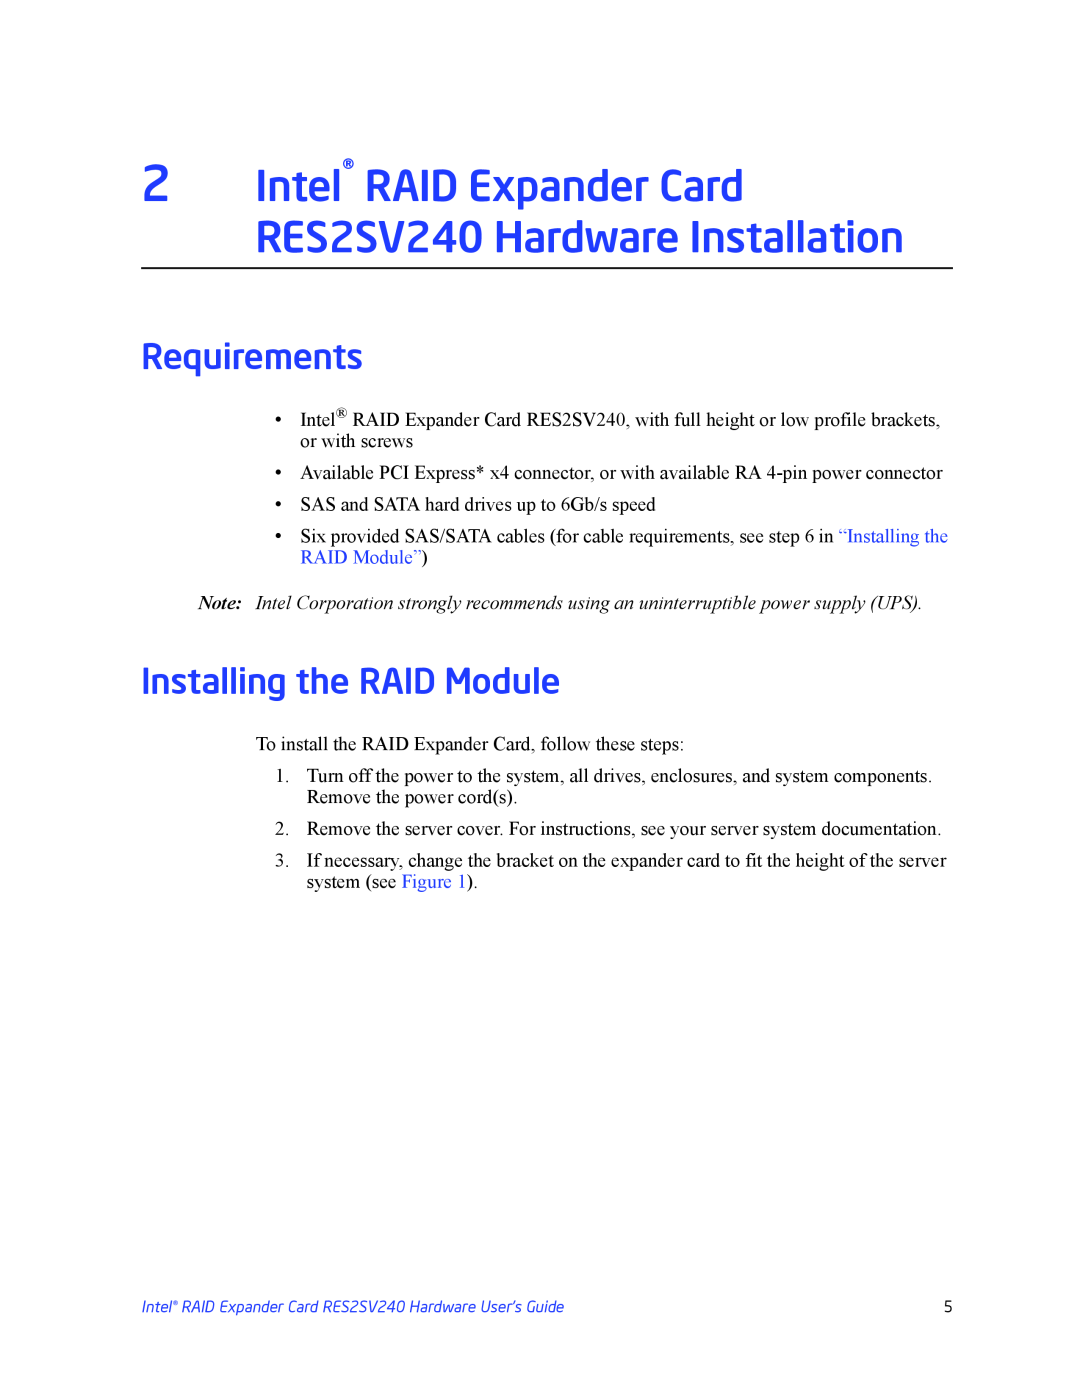 Intel RES2SV240 manual Requirements, Installing the RAID Module 